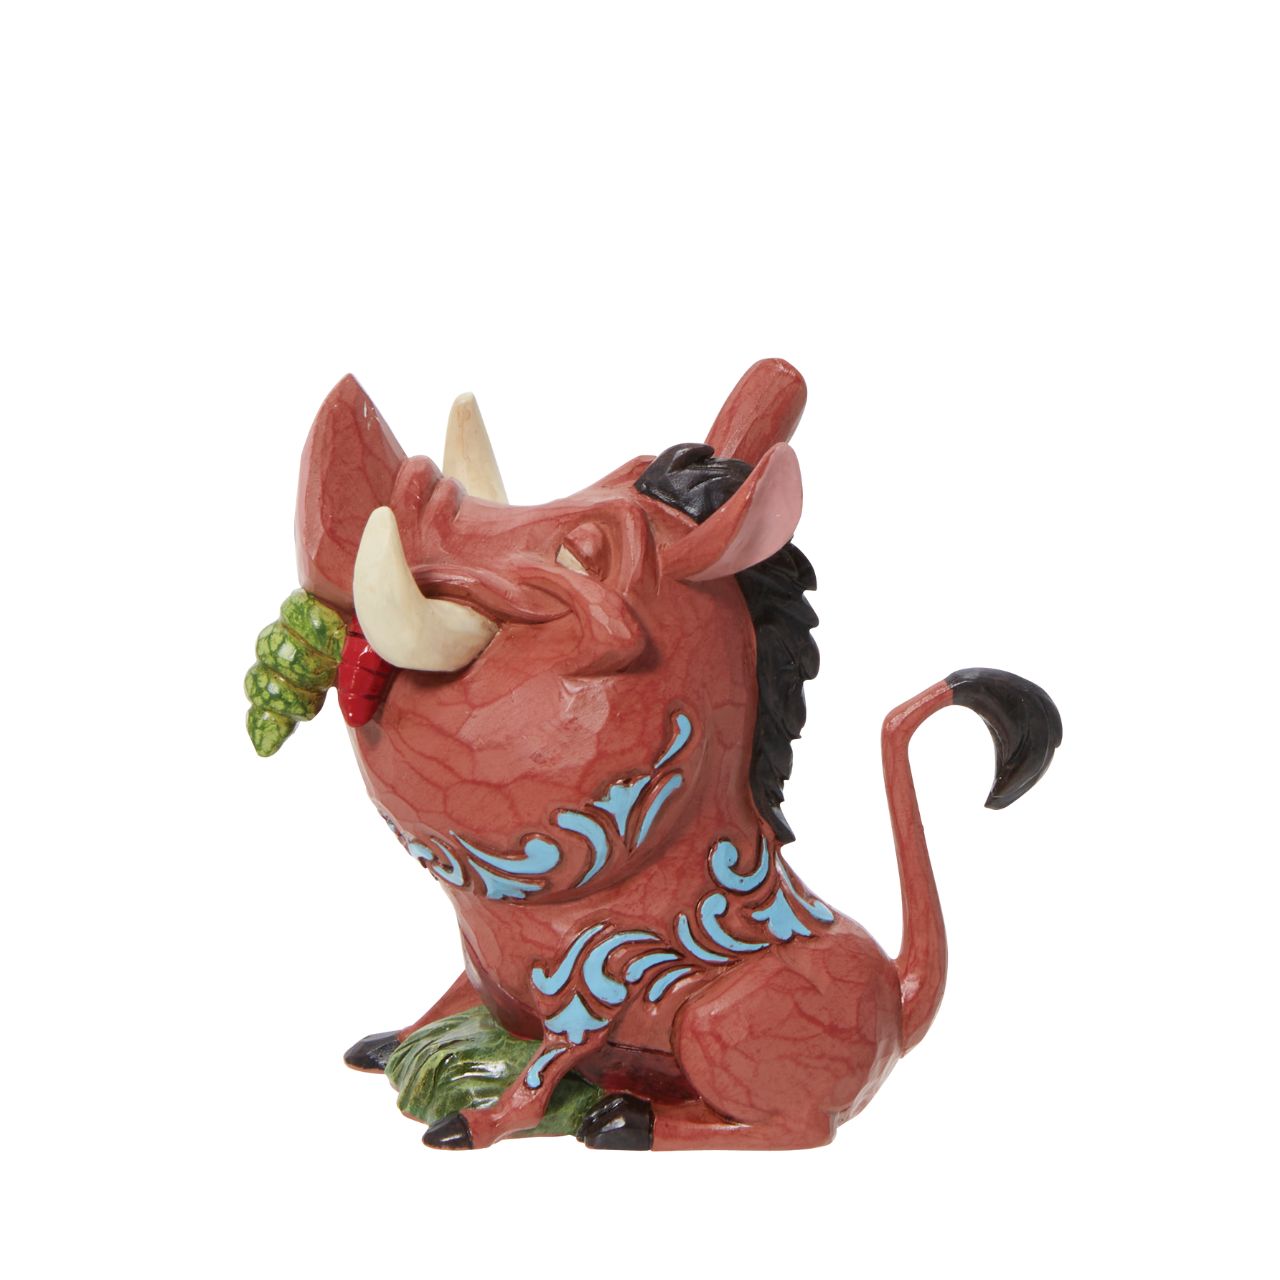 Pumba from the classic 1994 film The Lion King has been immortalised in this mini figurine. Designed by award winning artist Jim Shore, hand crafted using high quality cast stone and hand painted. Packaging: Full colour, fully branded gift box with photo.